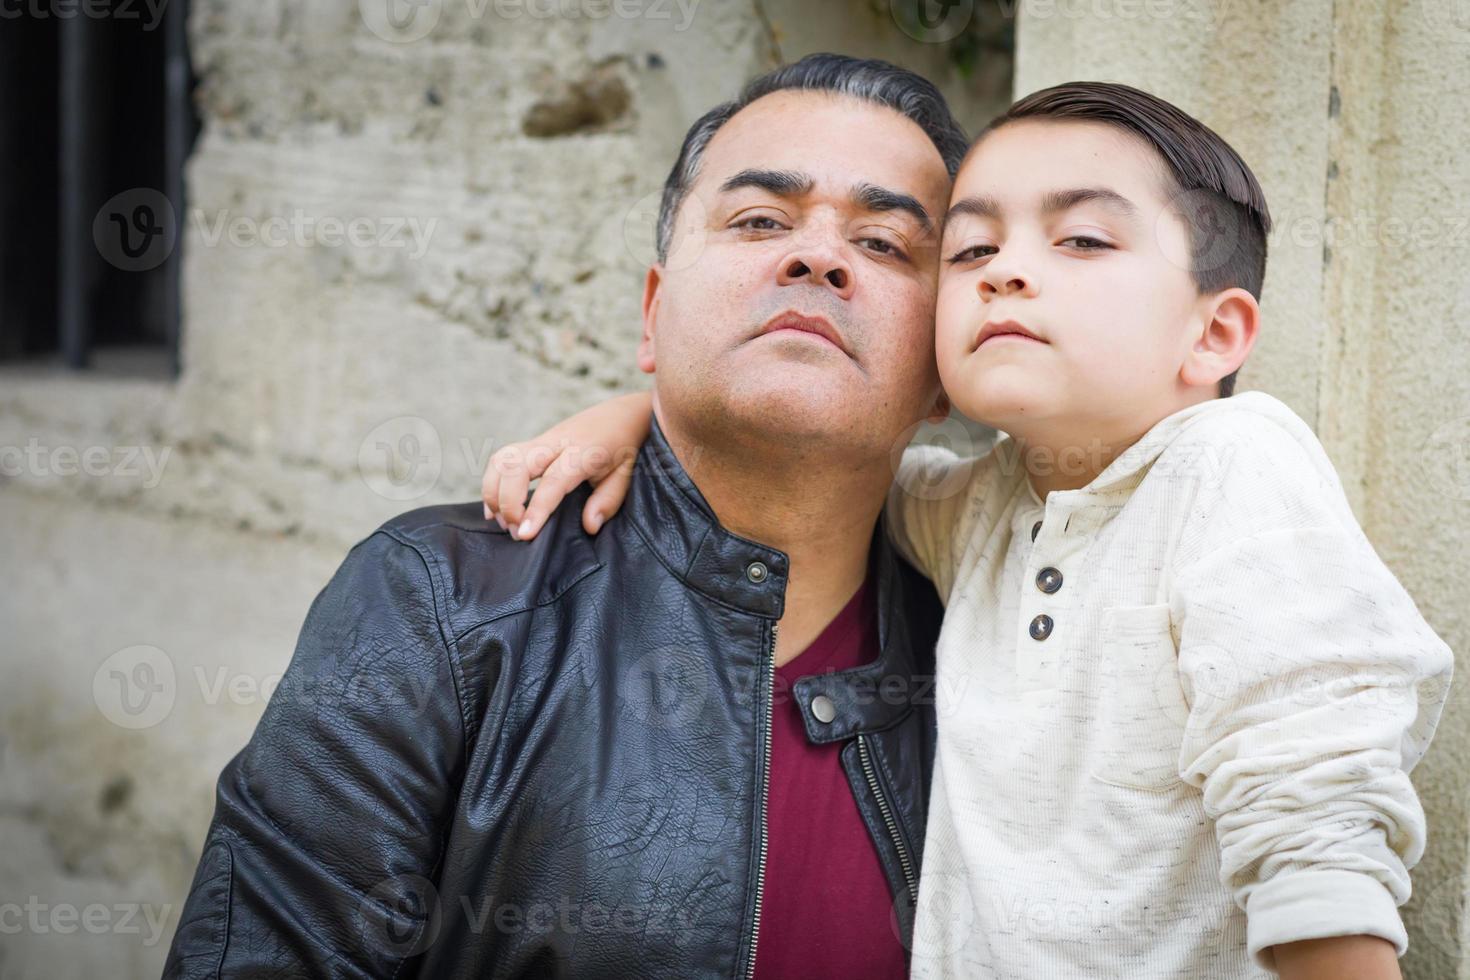 Portrait of Mixed Race Hispanic and Caucasian Son and Father photo